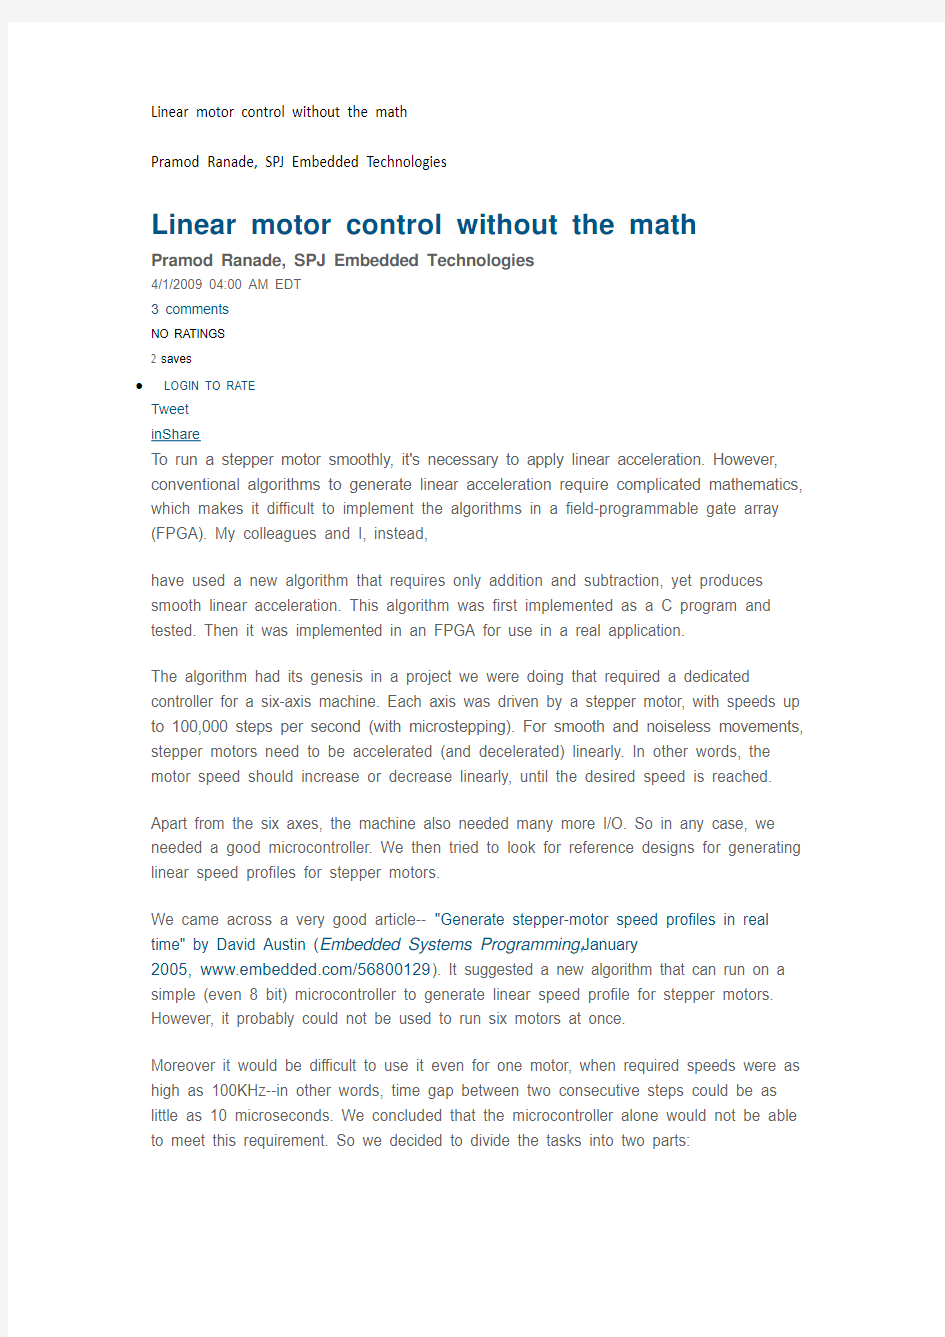 Linear motor control without the math by Pramod Ranade